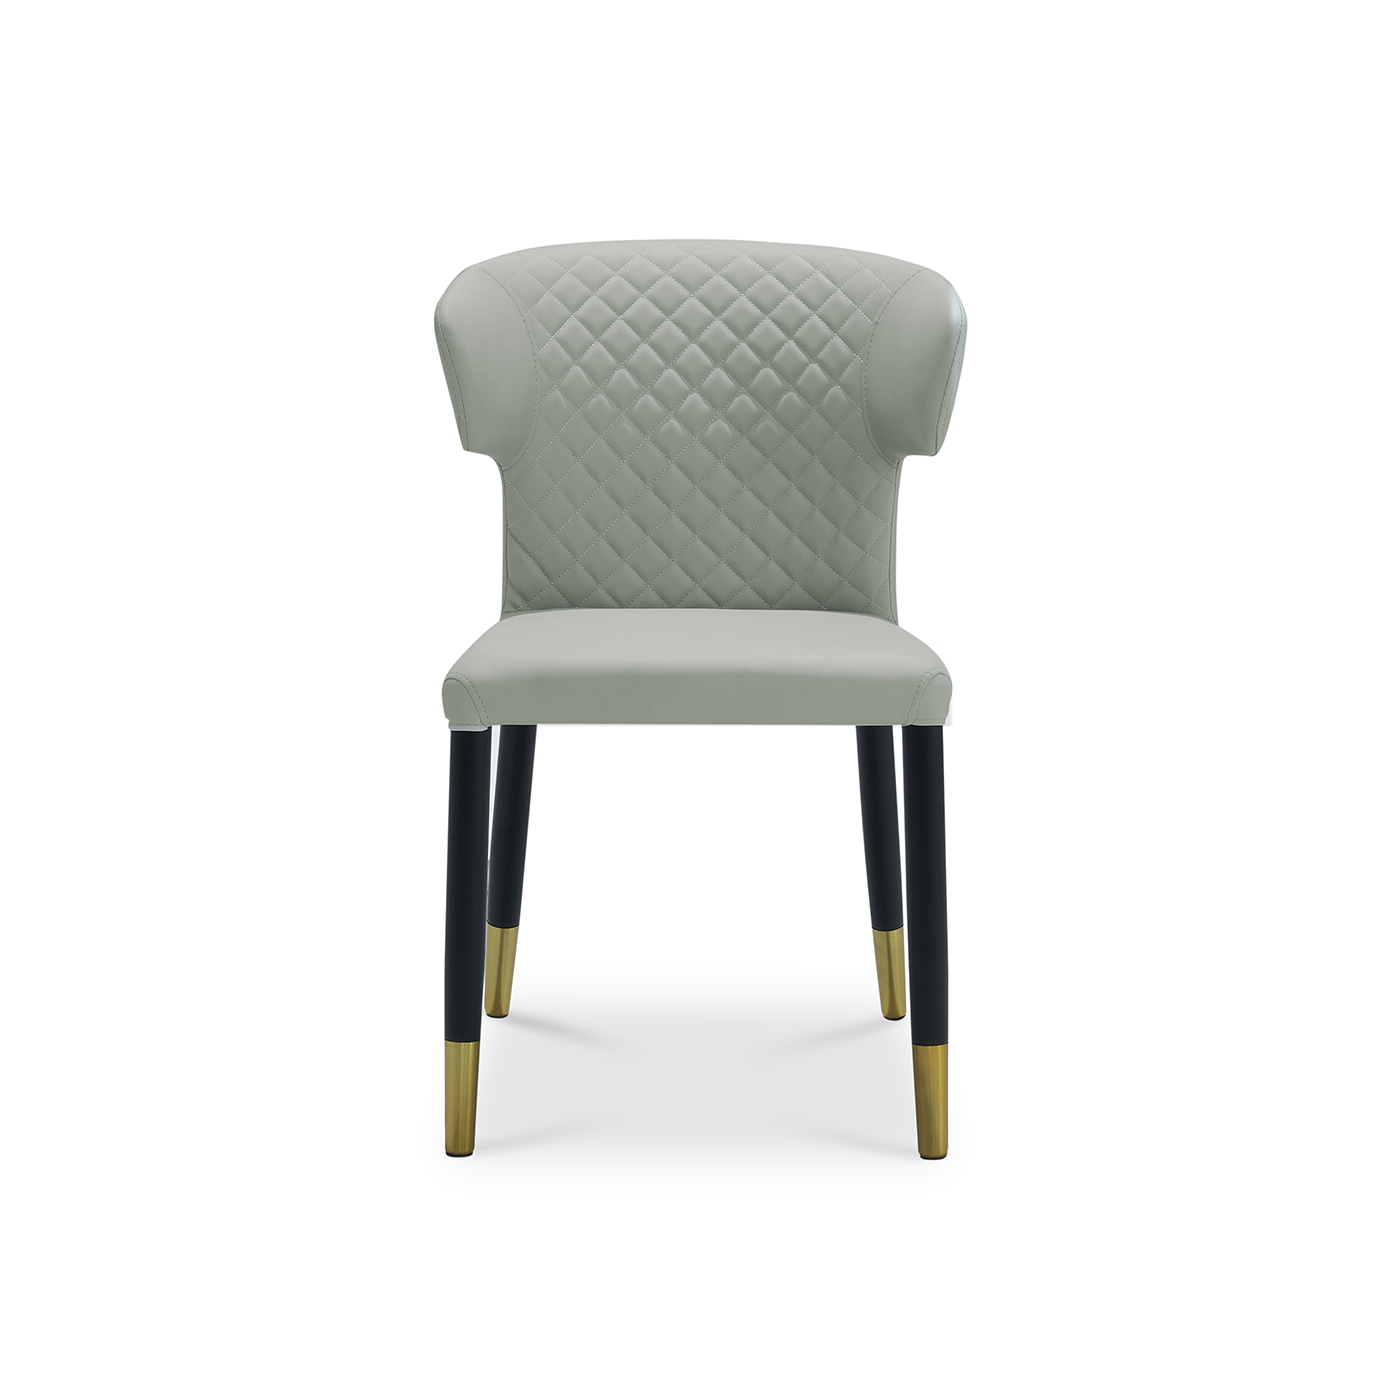 Checkered Dining Chair and High Resilience Foam Cushion